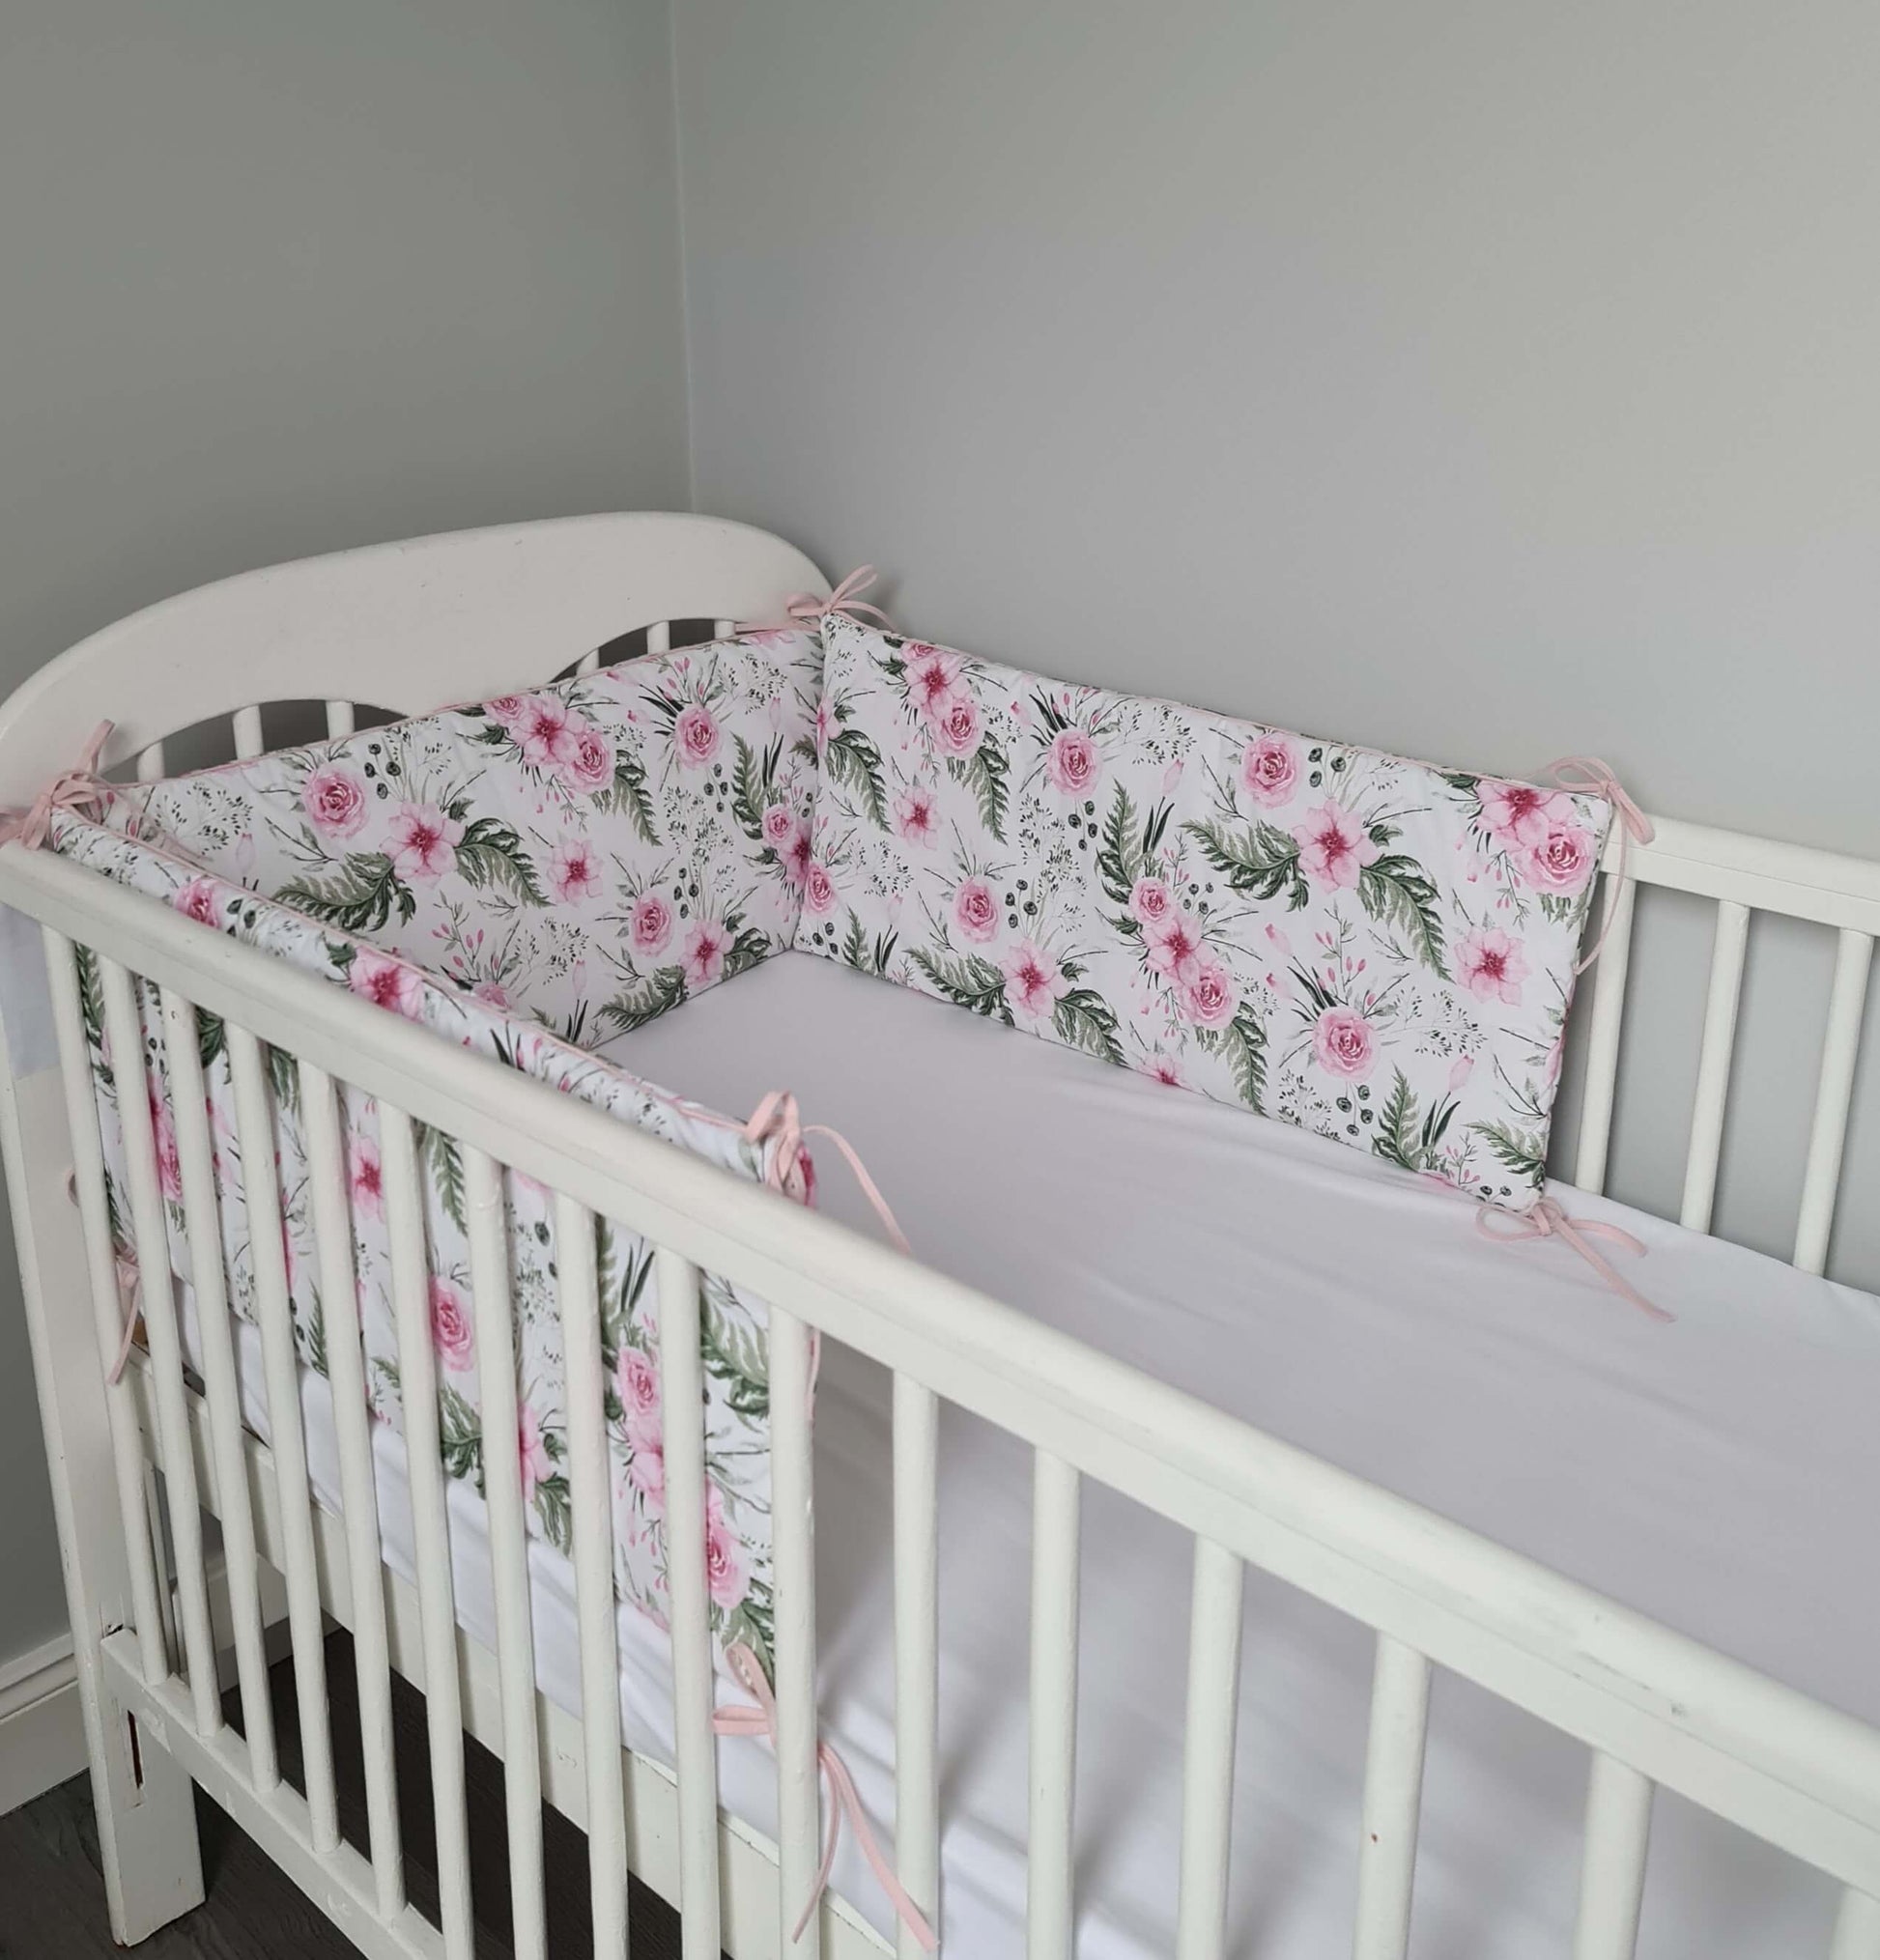 cotton bumpers for cribs cot bed with roses floral flowers pattern pink